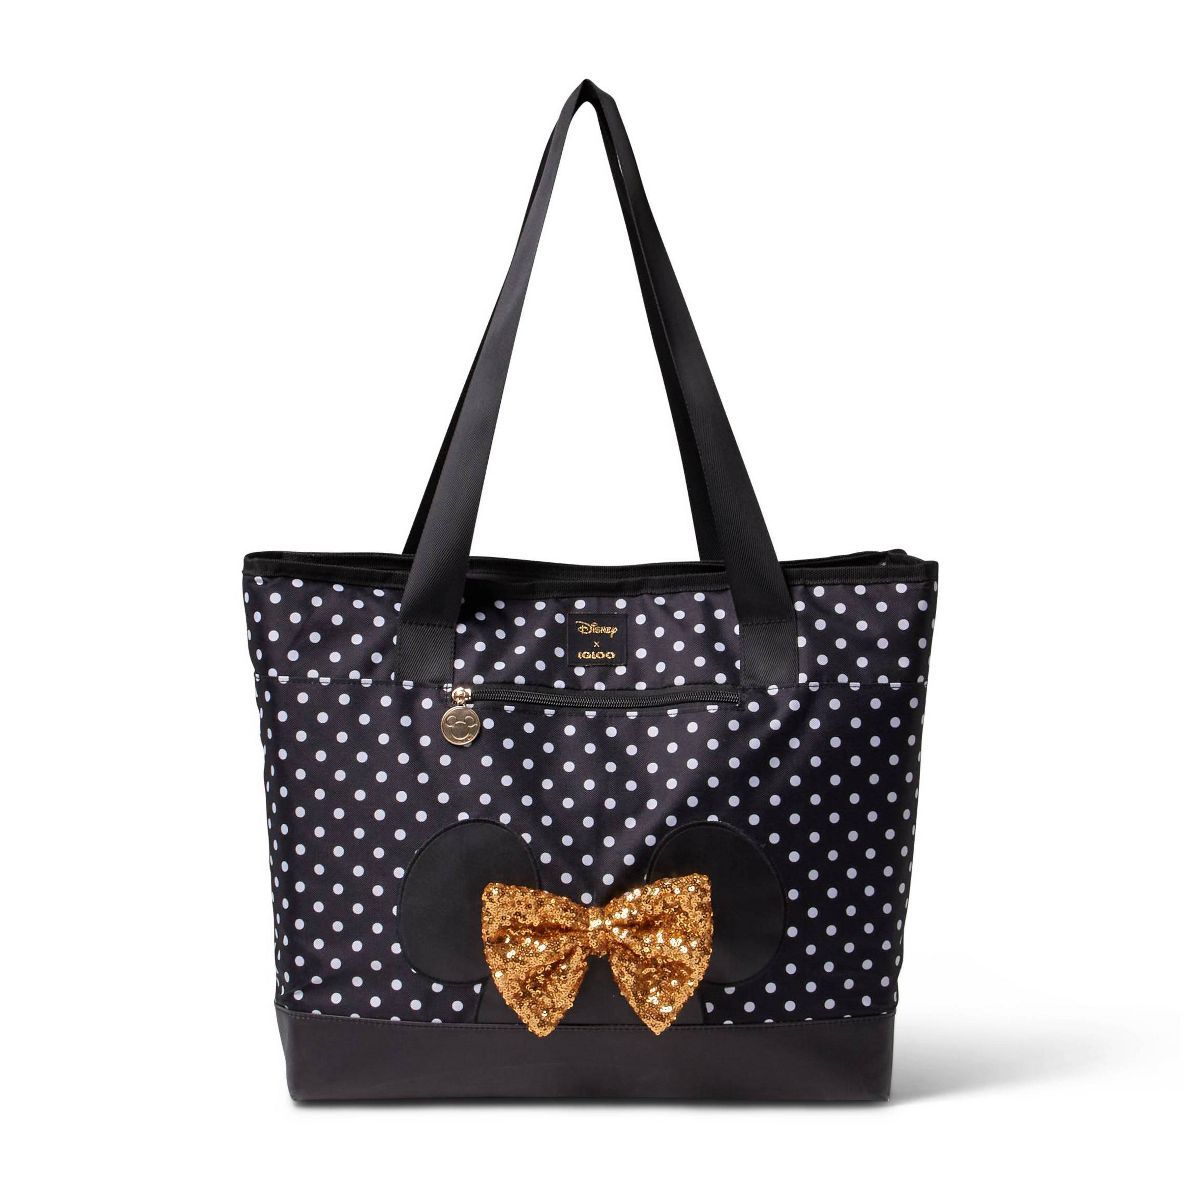 Igloo Dual Compartment 20qt Tote Cooler Bag - Minnie Mouse | Target